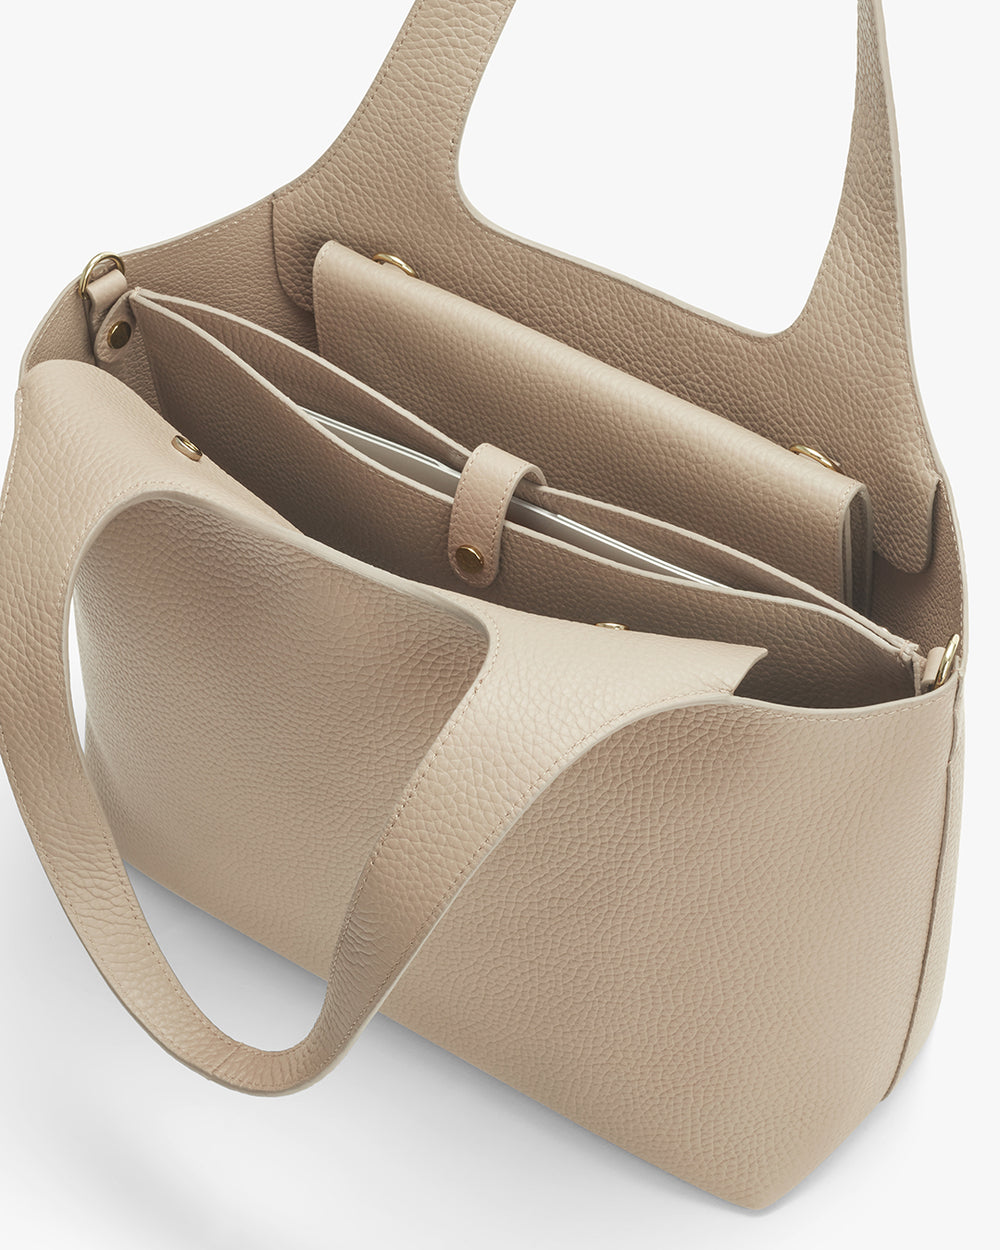 Open handbag showing interior compartments and strap.